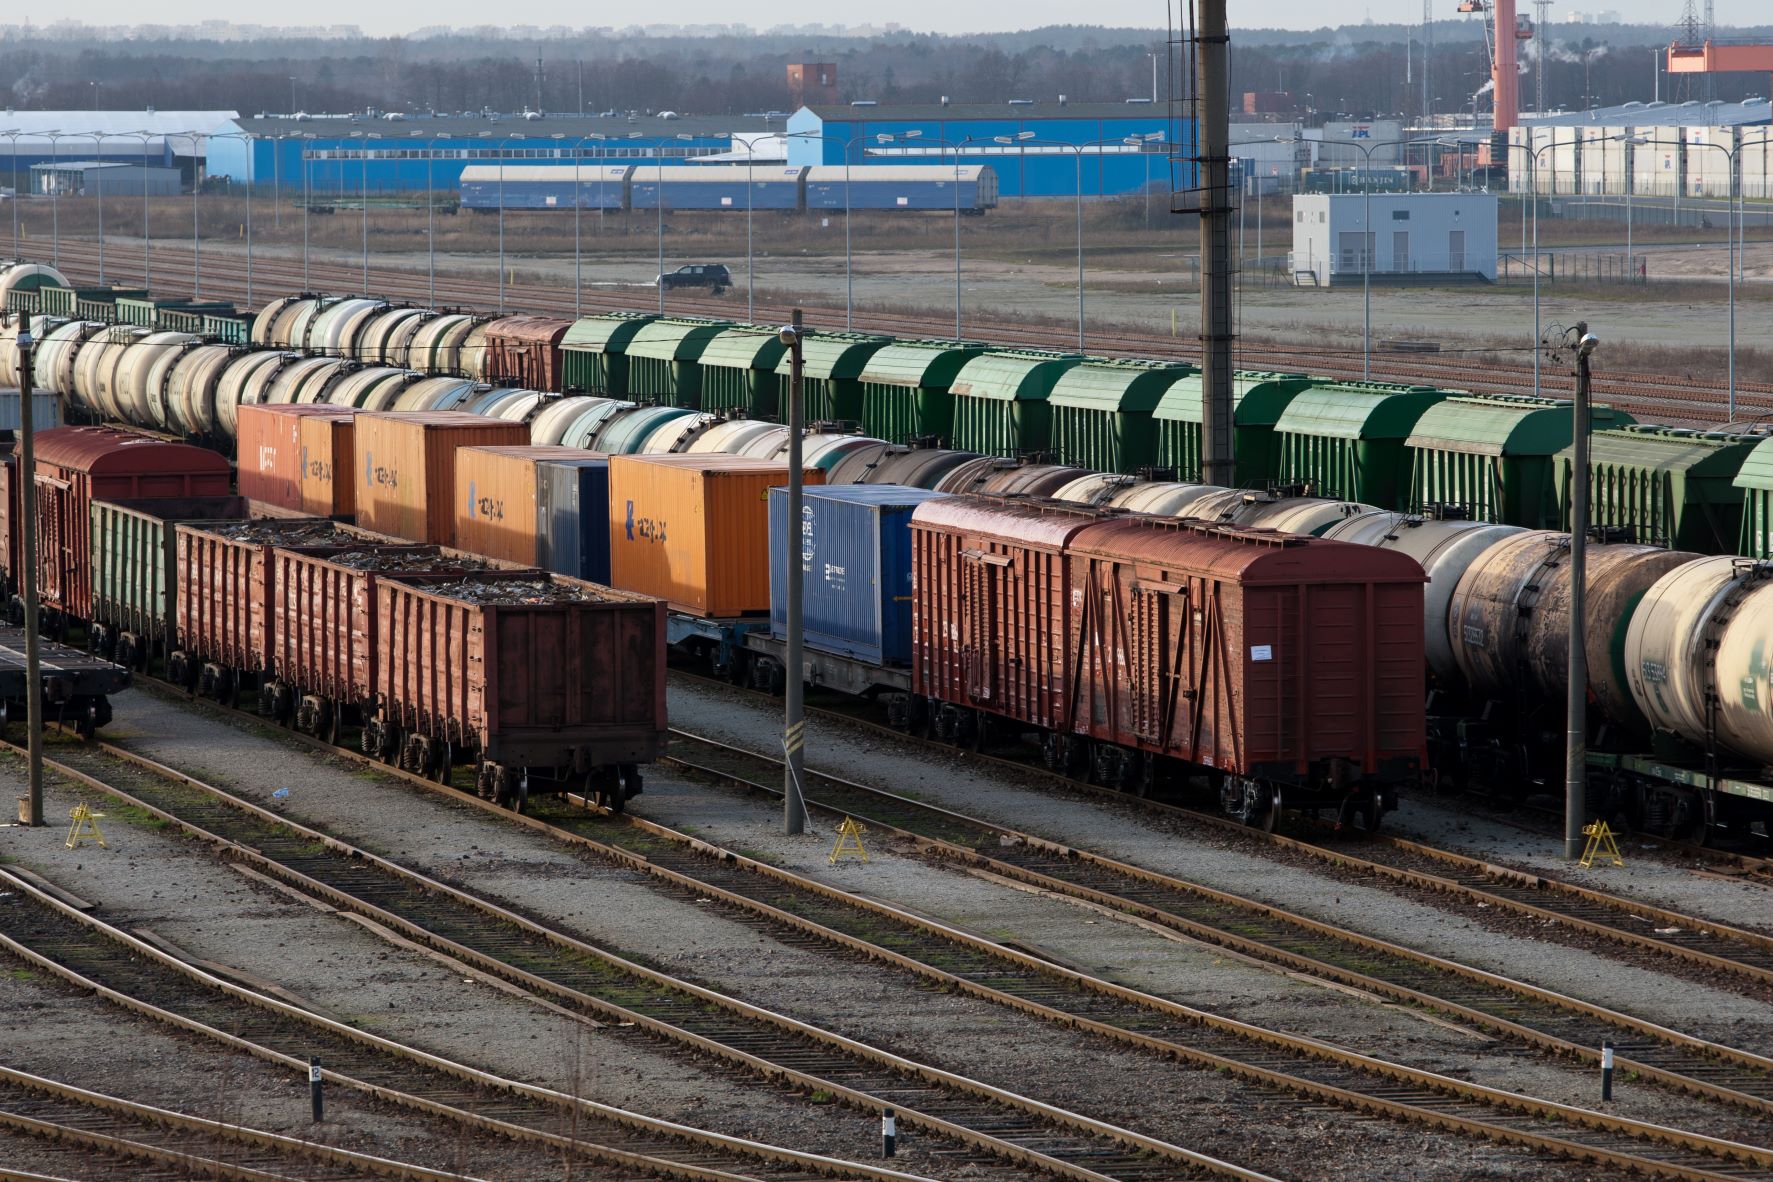 Operail no longer offers freight wagons in the public fleet for freight transport, all wagons are in the private fleet